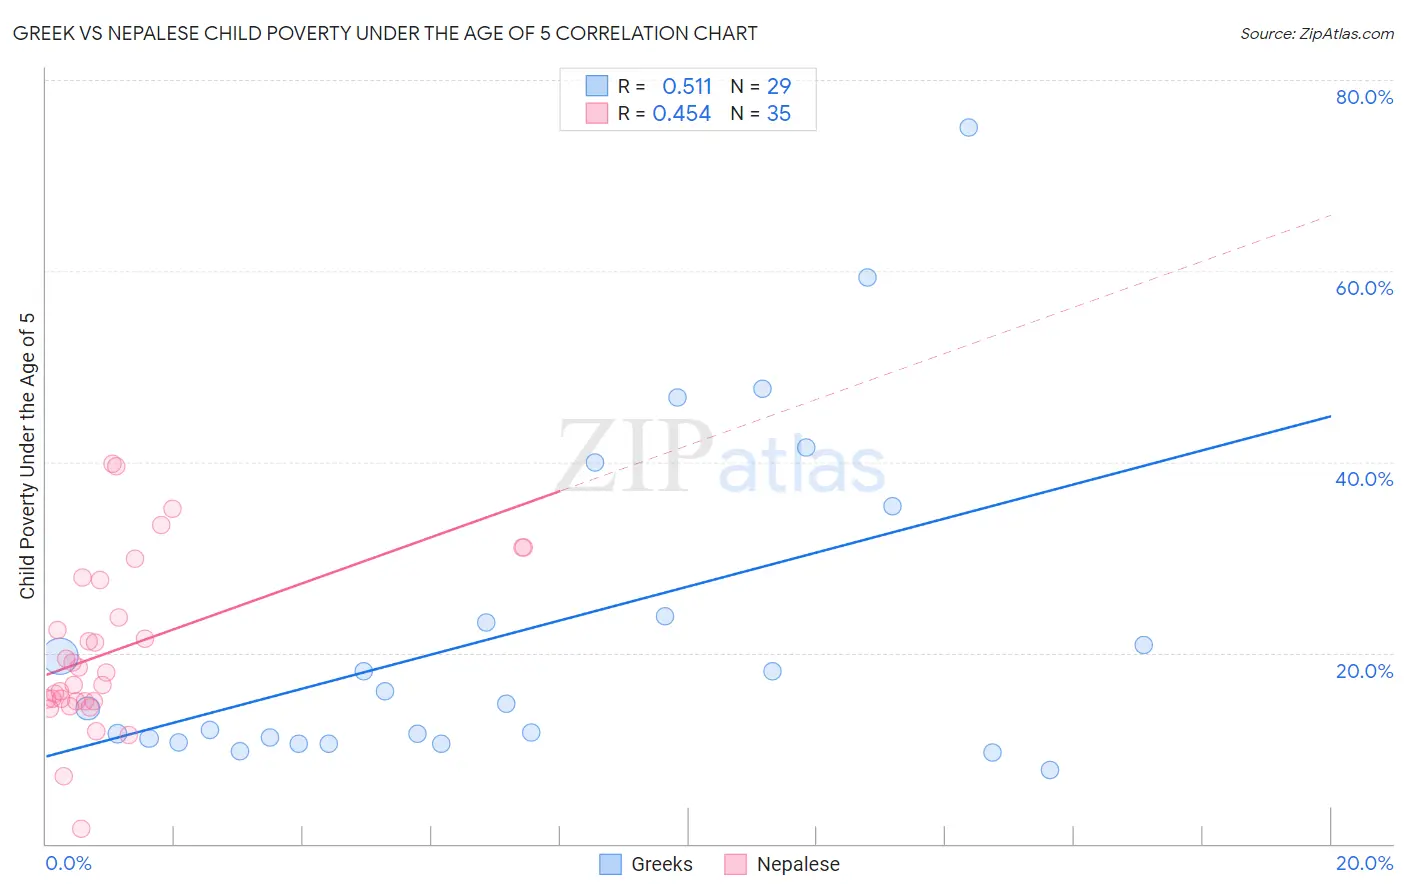 Greek vs Nepalese Child Poverty Under the Age of 5